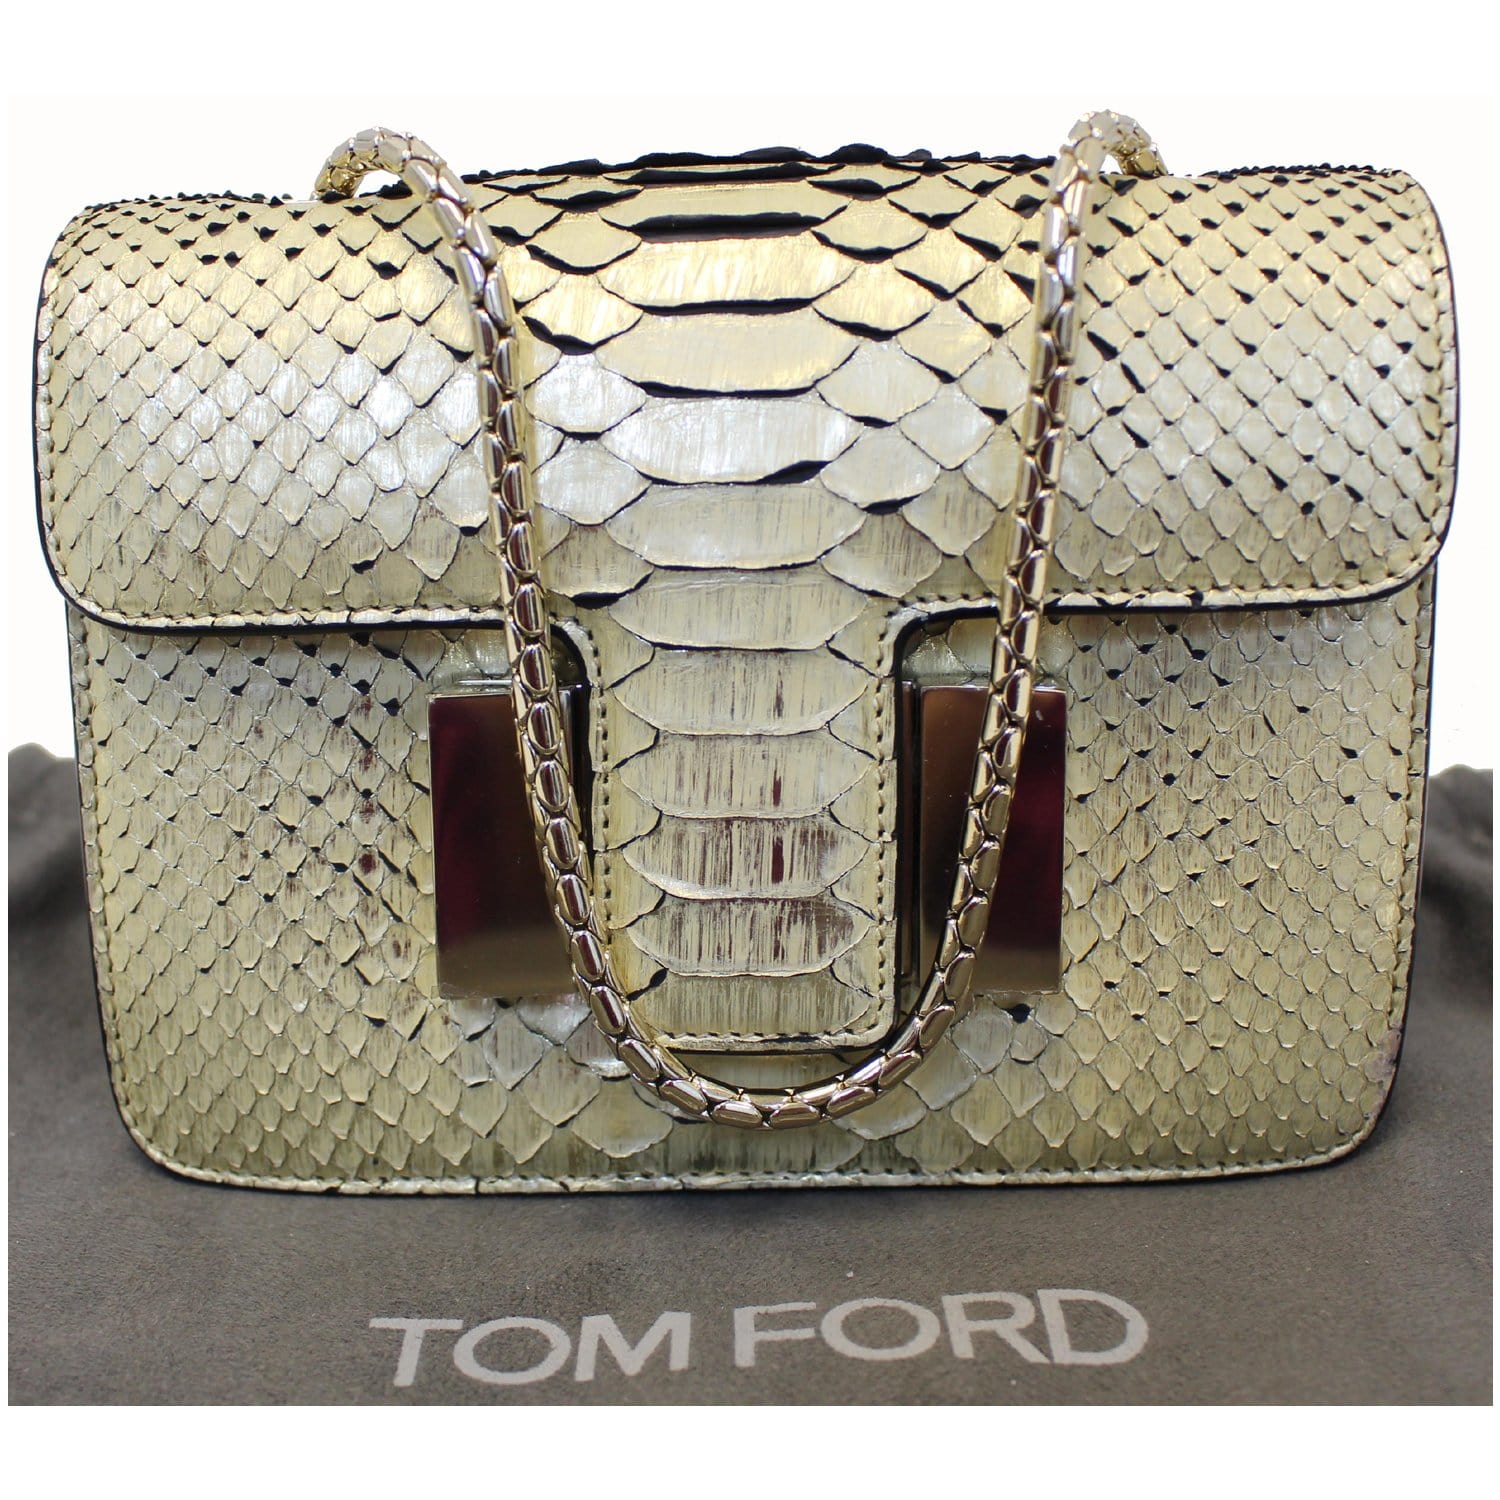 Tom Ford Women's Bags